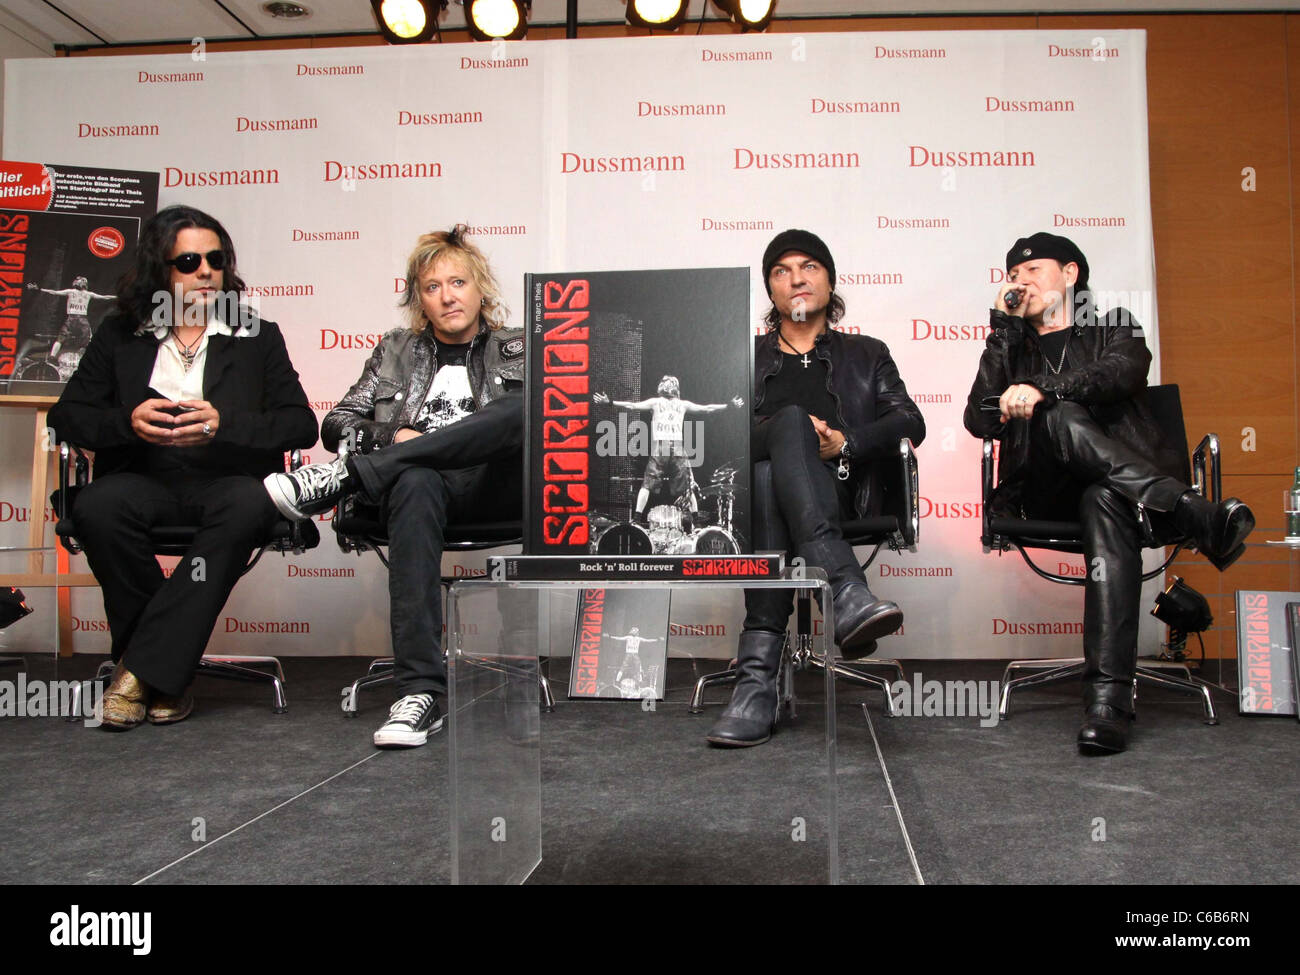 Pawel Maciwoda, James Kottak, Matthias Jabs and Klaus Meine at the launch of the book 'Rock'n'Roll Forever - Scorpions' at Stock Photo